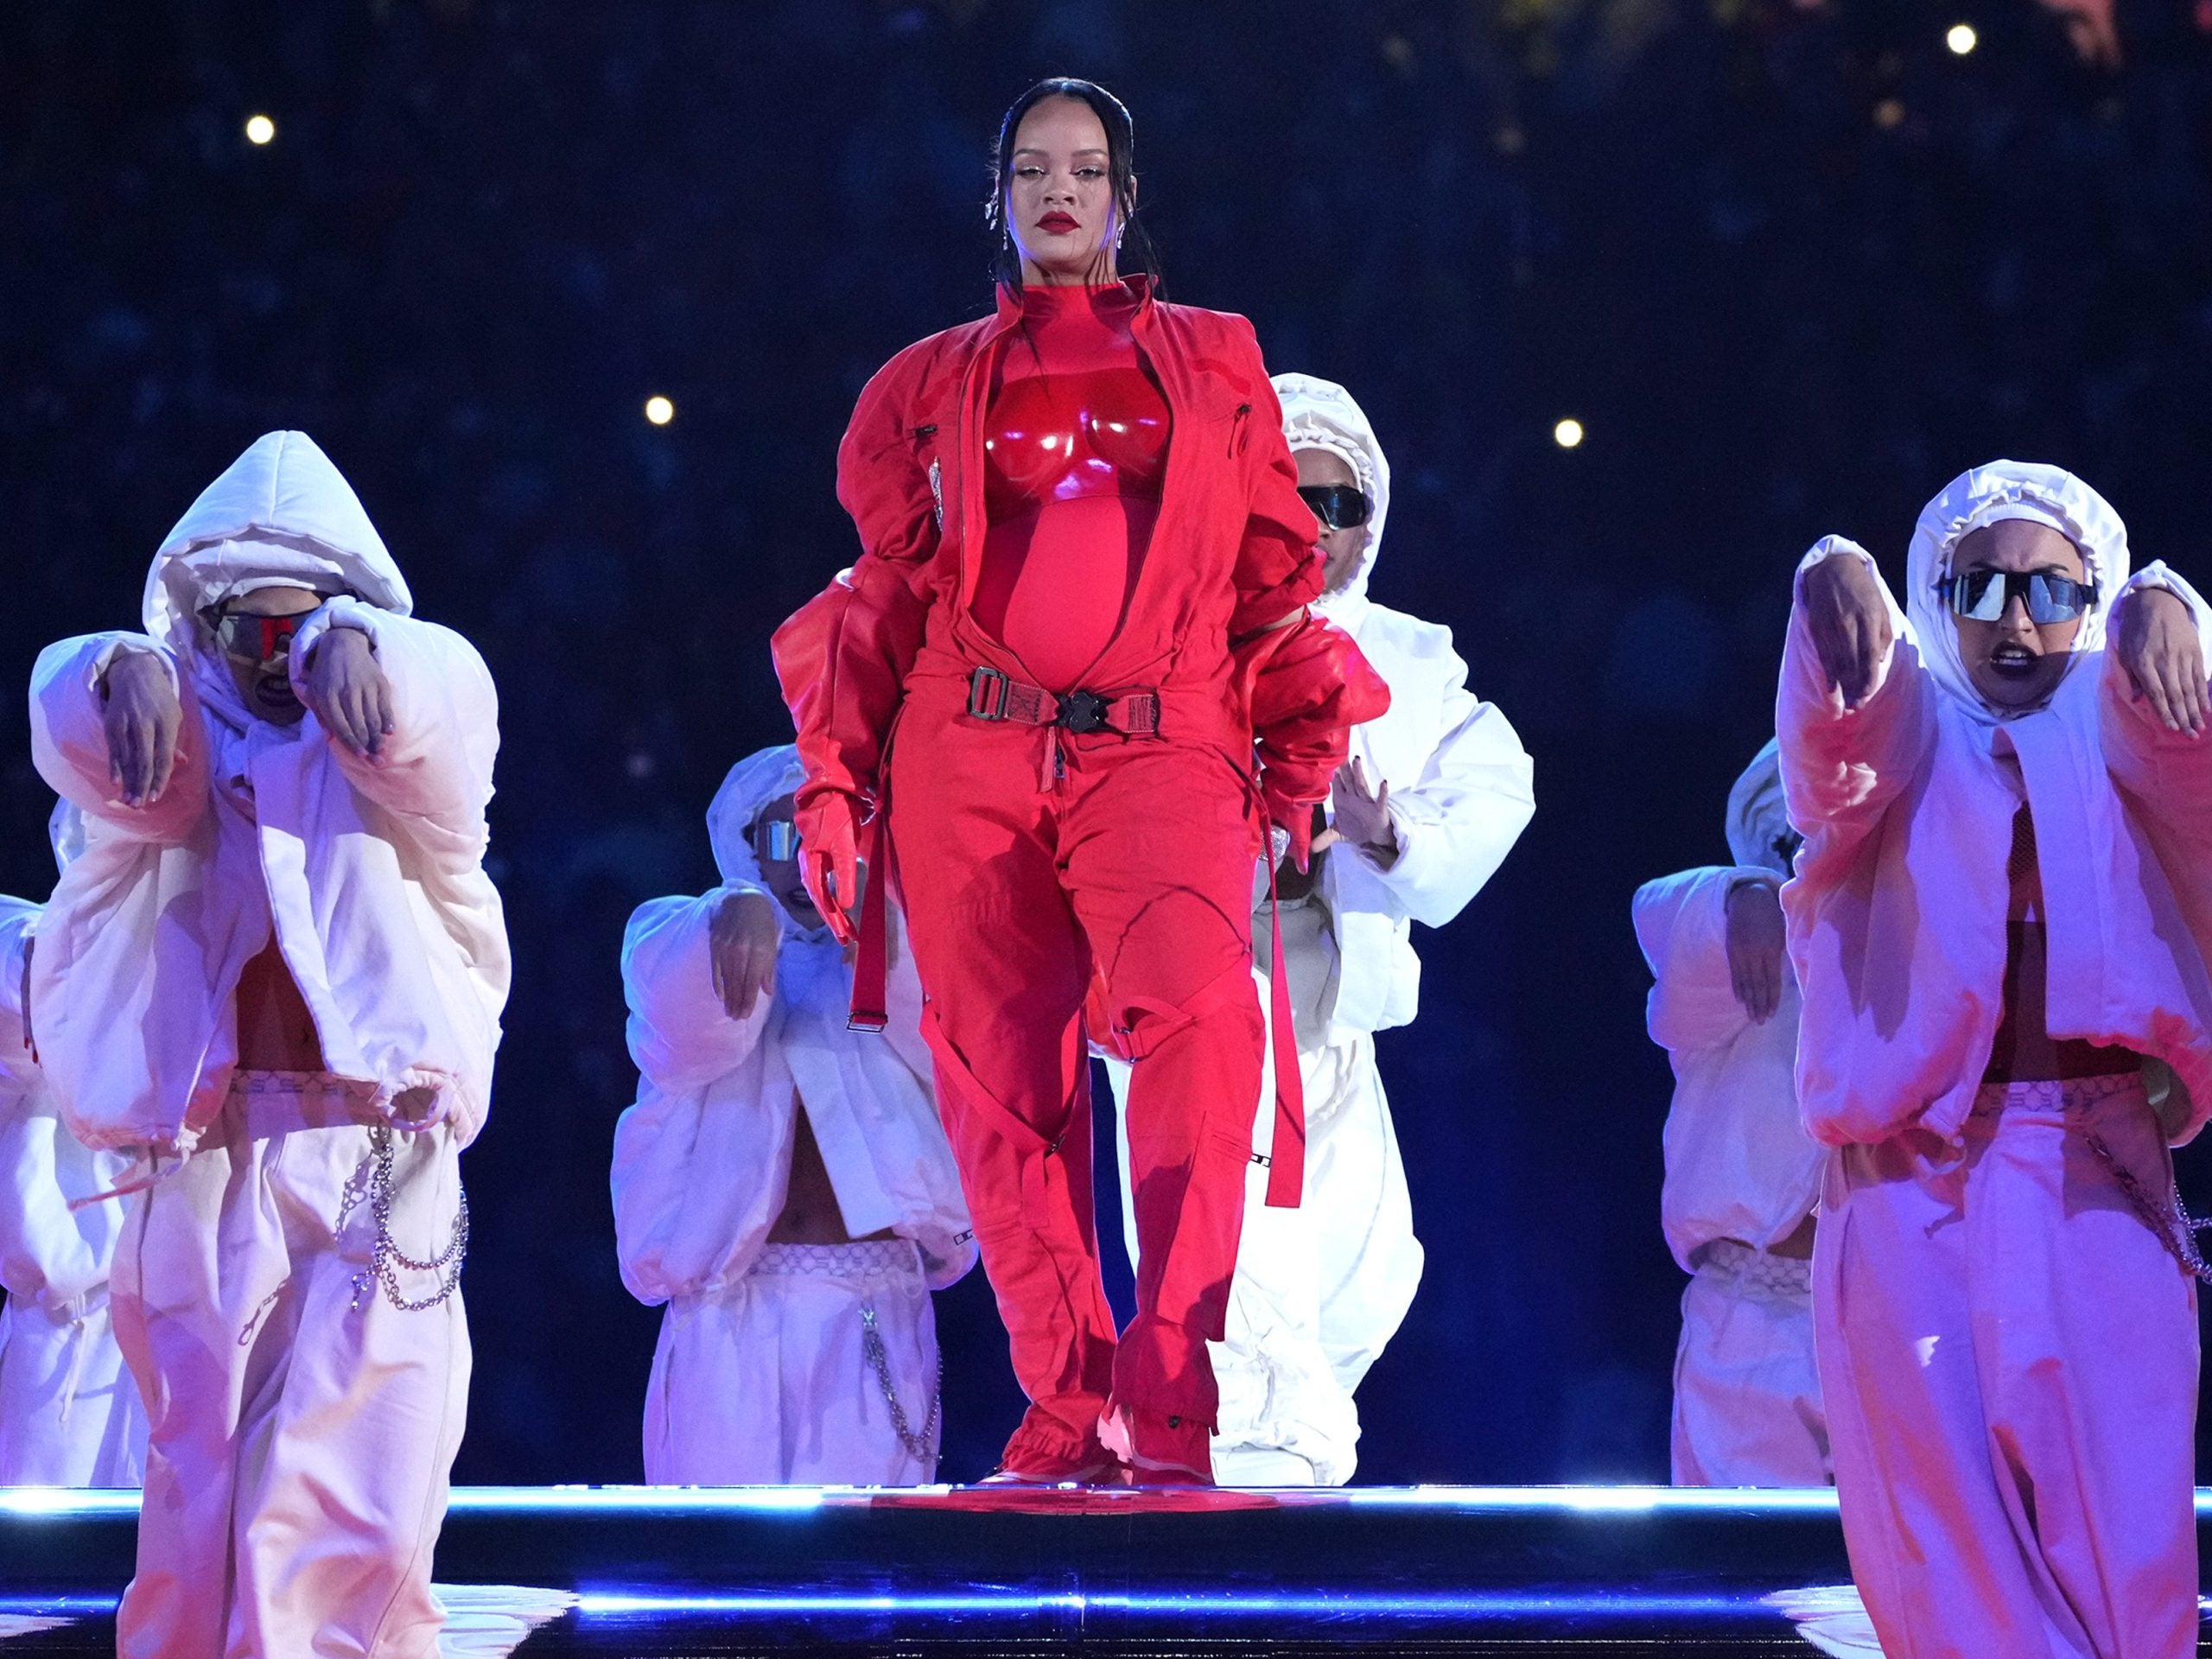 Rihanna’s Super Bowl Performance Proves Pregnancy Can’t Stop Any Woman’s Show